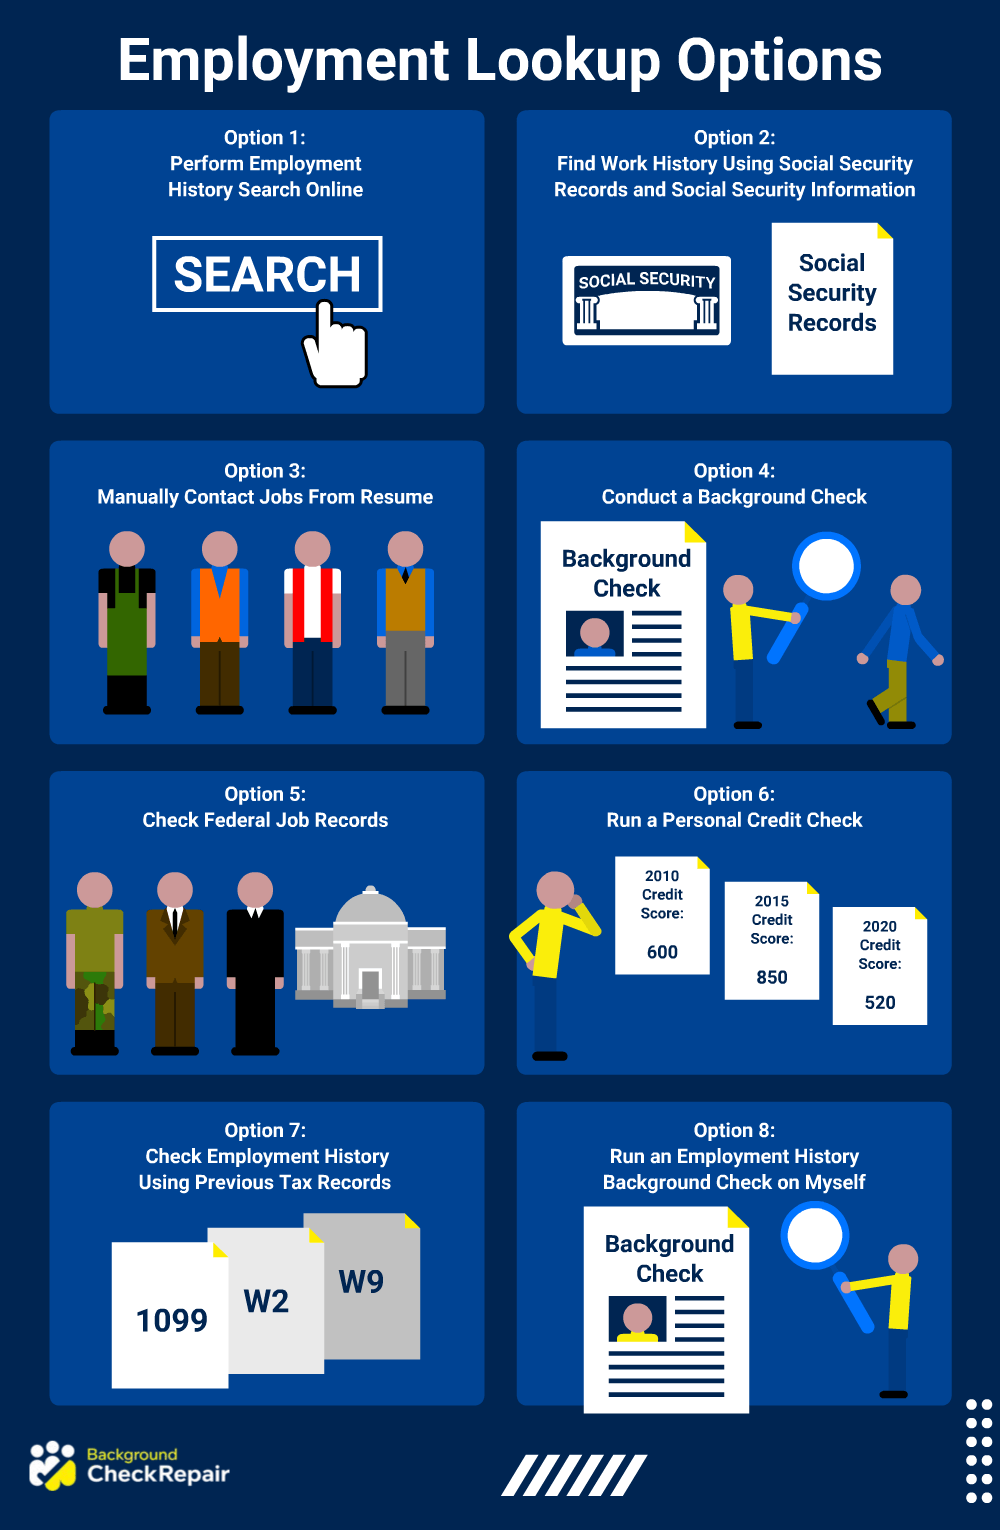 Graphic explaining how to find someone employment history and employment lookup options, including online search for employment history, social security records search, manually calling previous employers, running a credit check, checking W-2s and other federal tax documents, and performing a background check that includes employment history.